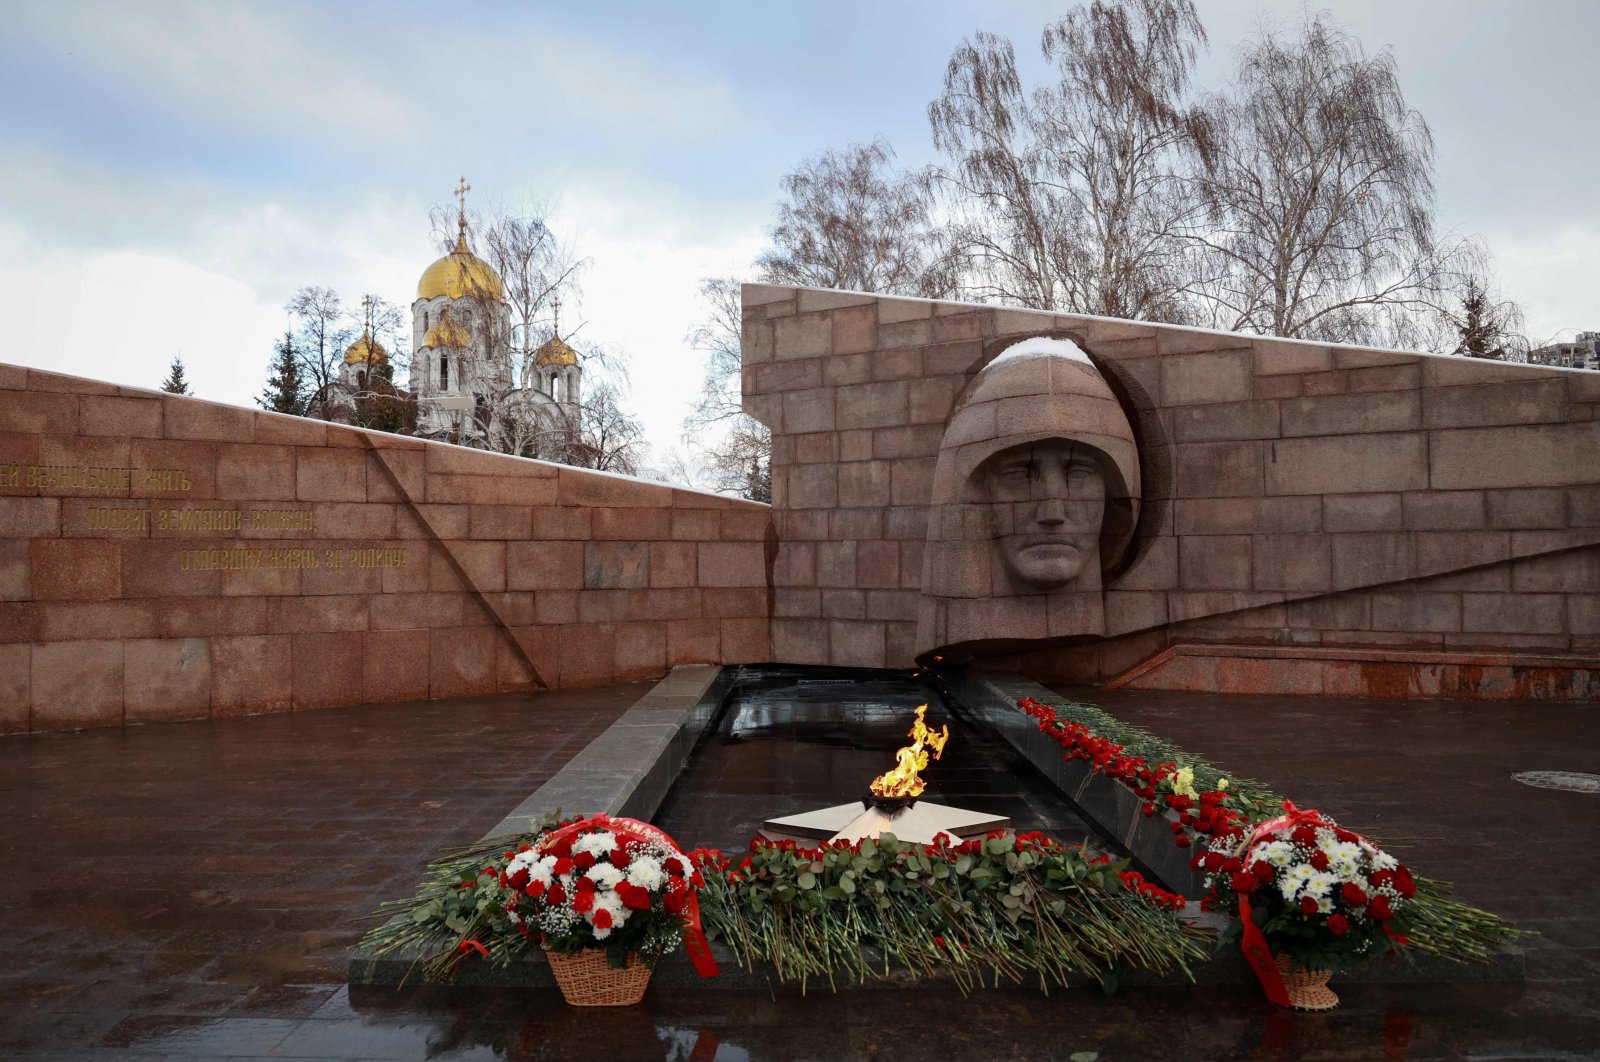 Flowers laid at the memorial Eternal flame for more than 80 Russian soldiers killed in a Ukrainian strike on Russian-controlled territory, Samara, Russia, Jan. 3, 2023. (AFP Photo)